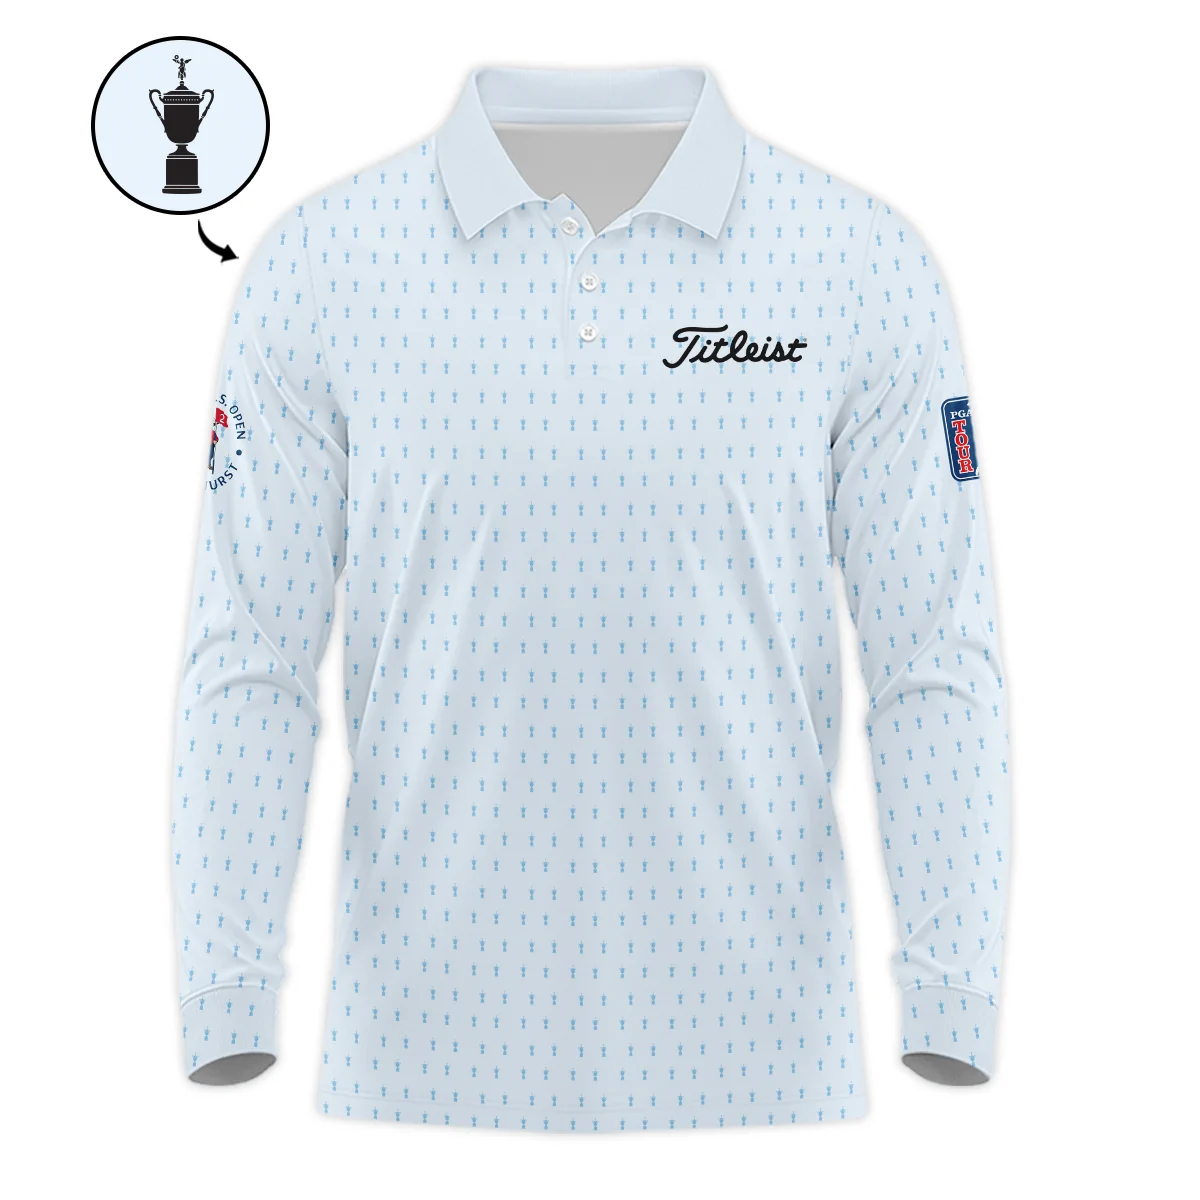 124th U.S. Open Pinehurst Titleist Polo Shirt Sports Pattern Cup Color Light Blue All Over Print Polo Shirt For Men